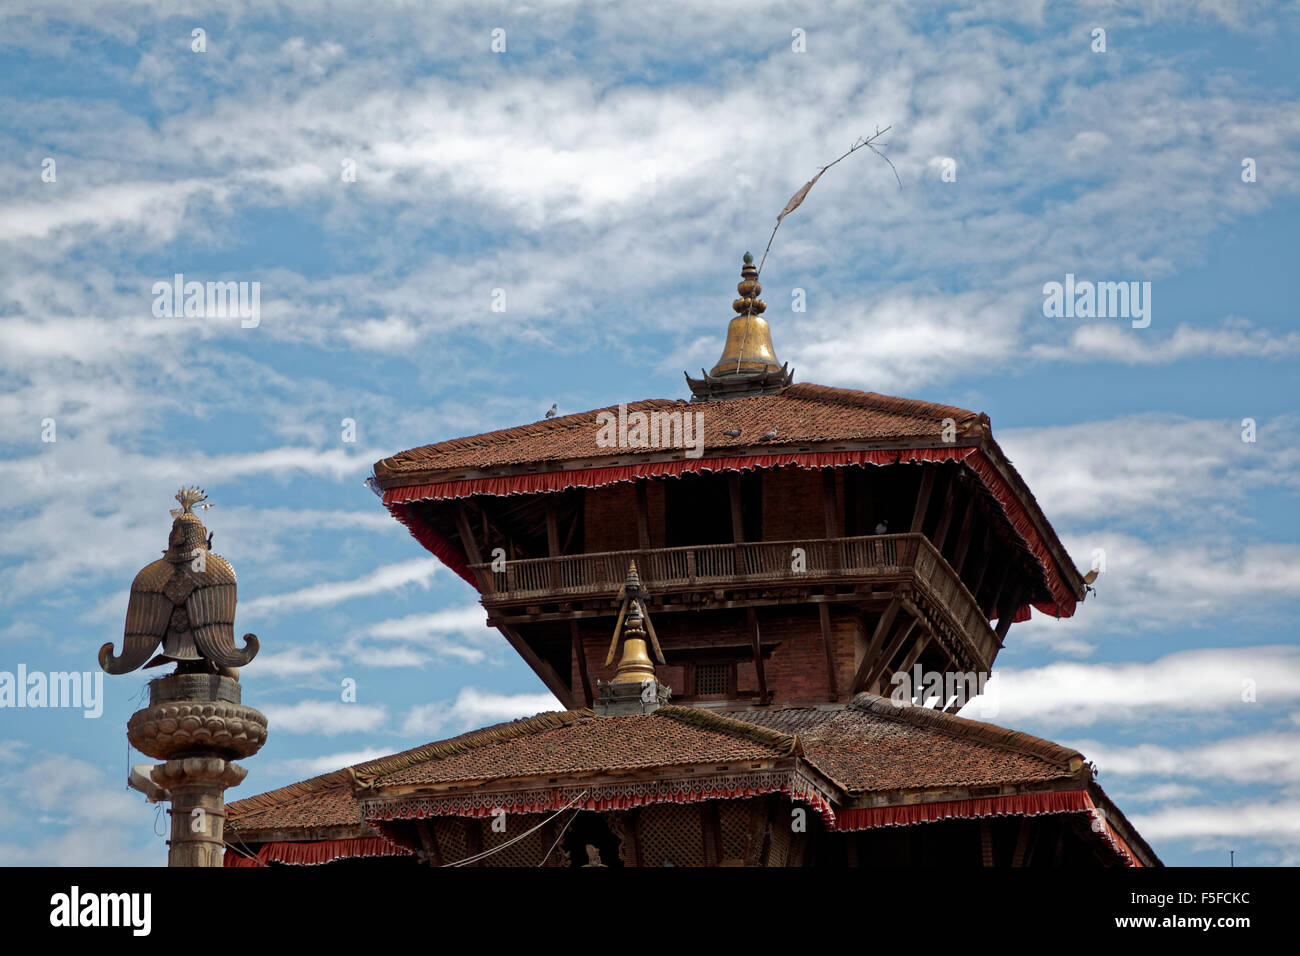 Lalitpur Durbar Square monuments before getting damagen in 2015 earthquake Stock Photo